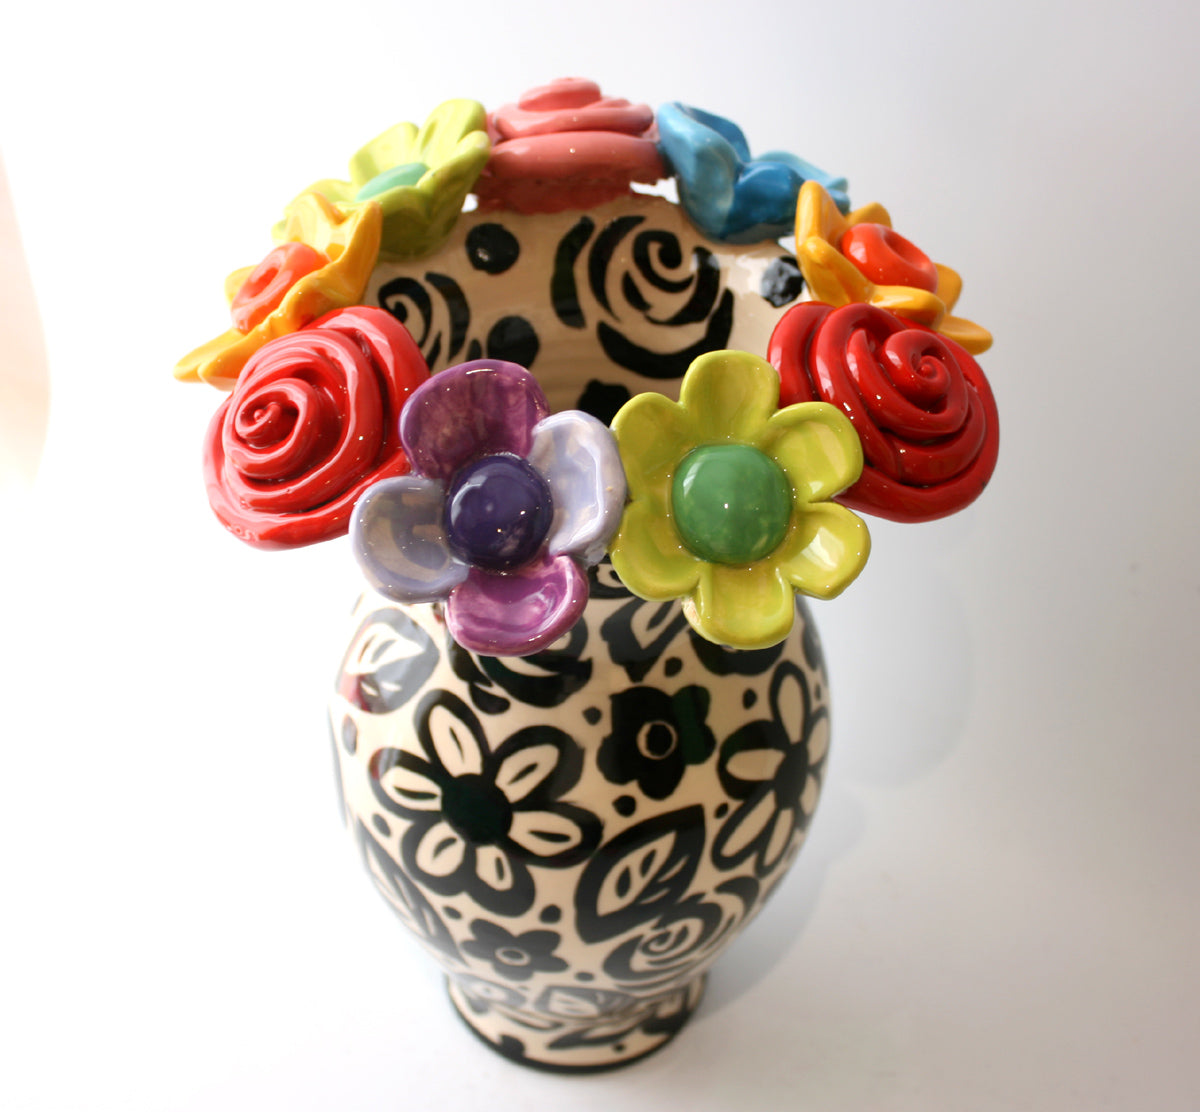 Large Multiflower Encrusted Vase in Black and White Blooms - MaryRoseYoung